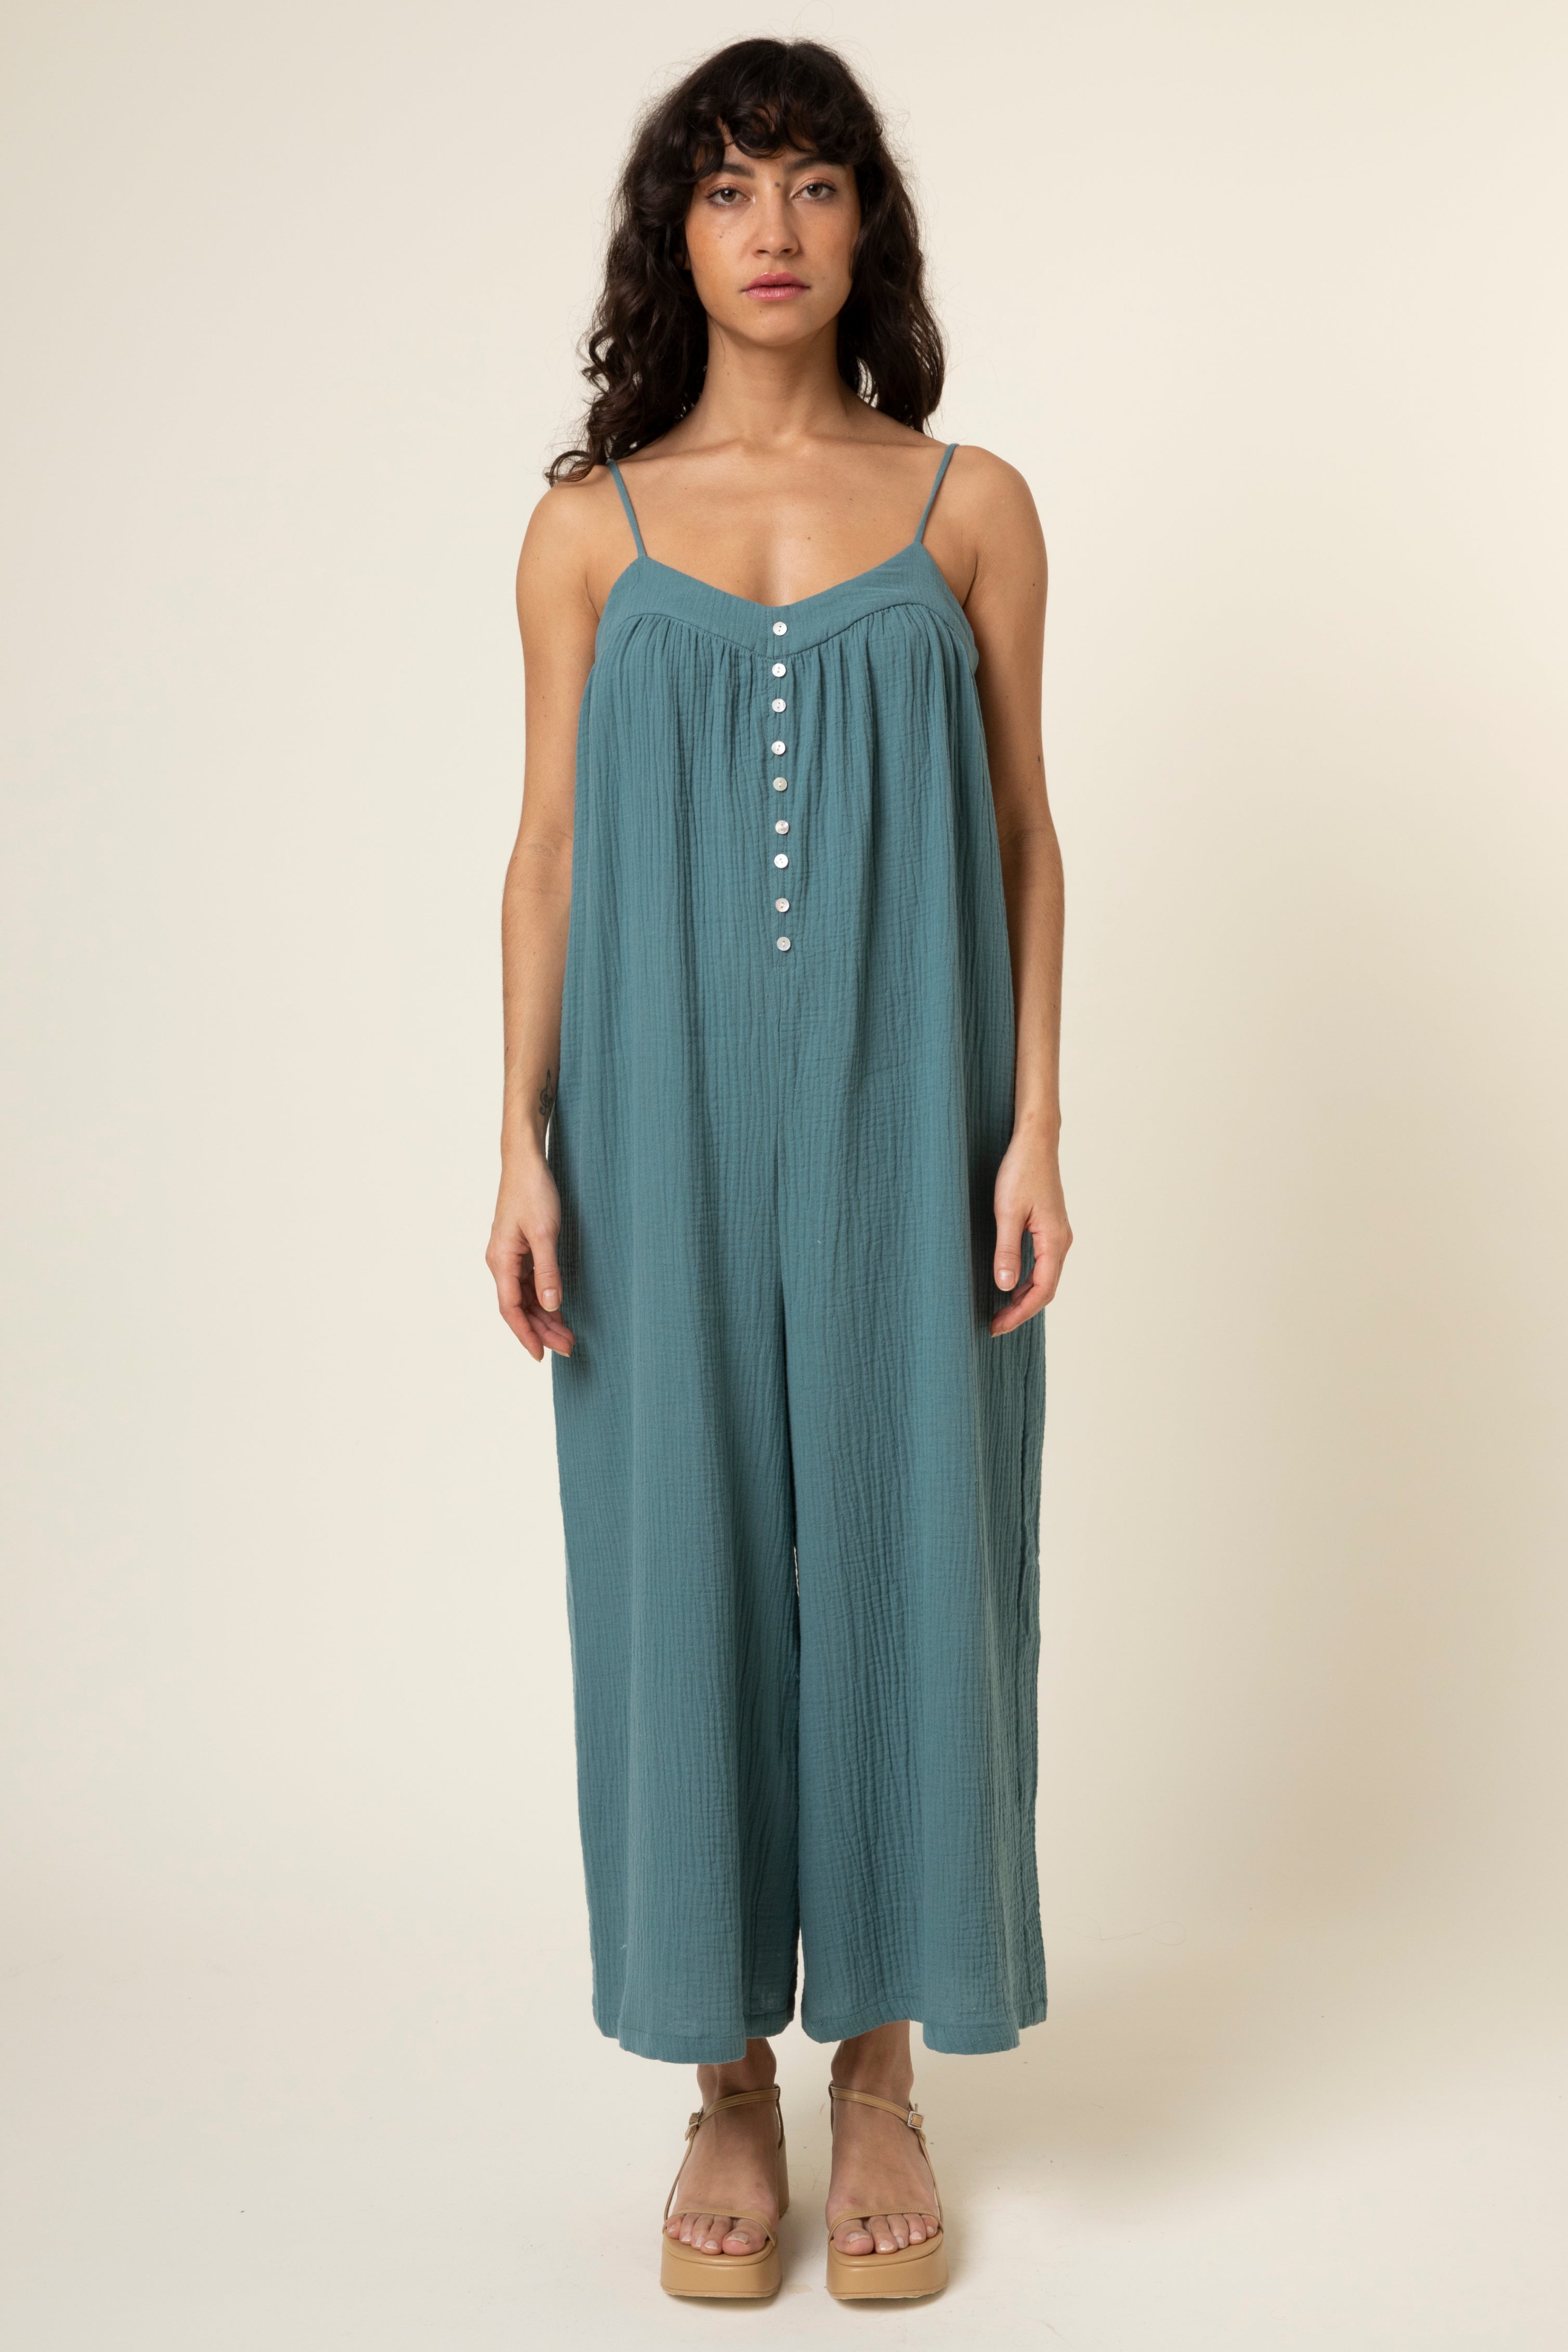 The Regina Woven Jumpsuit by FRNCH